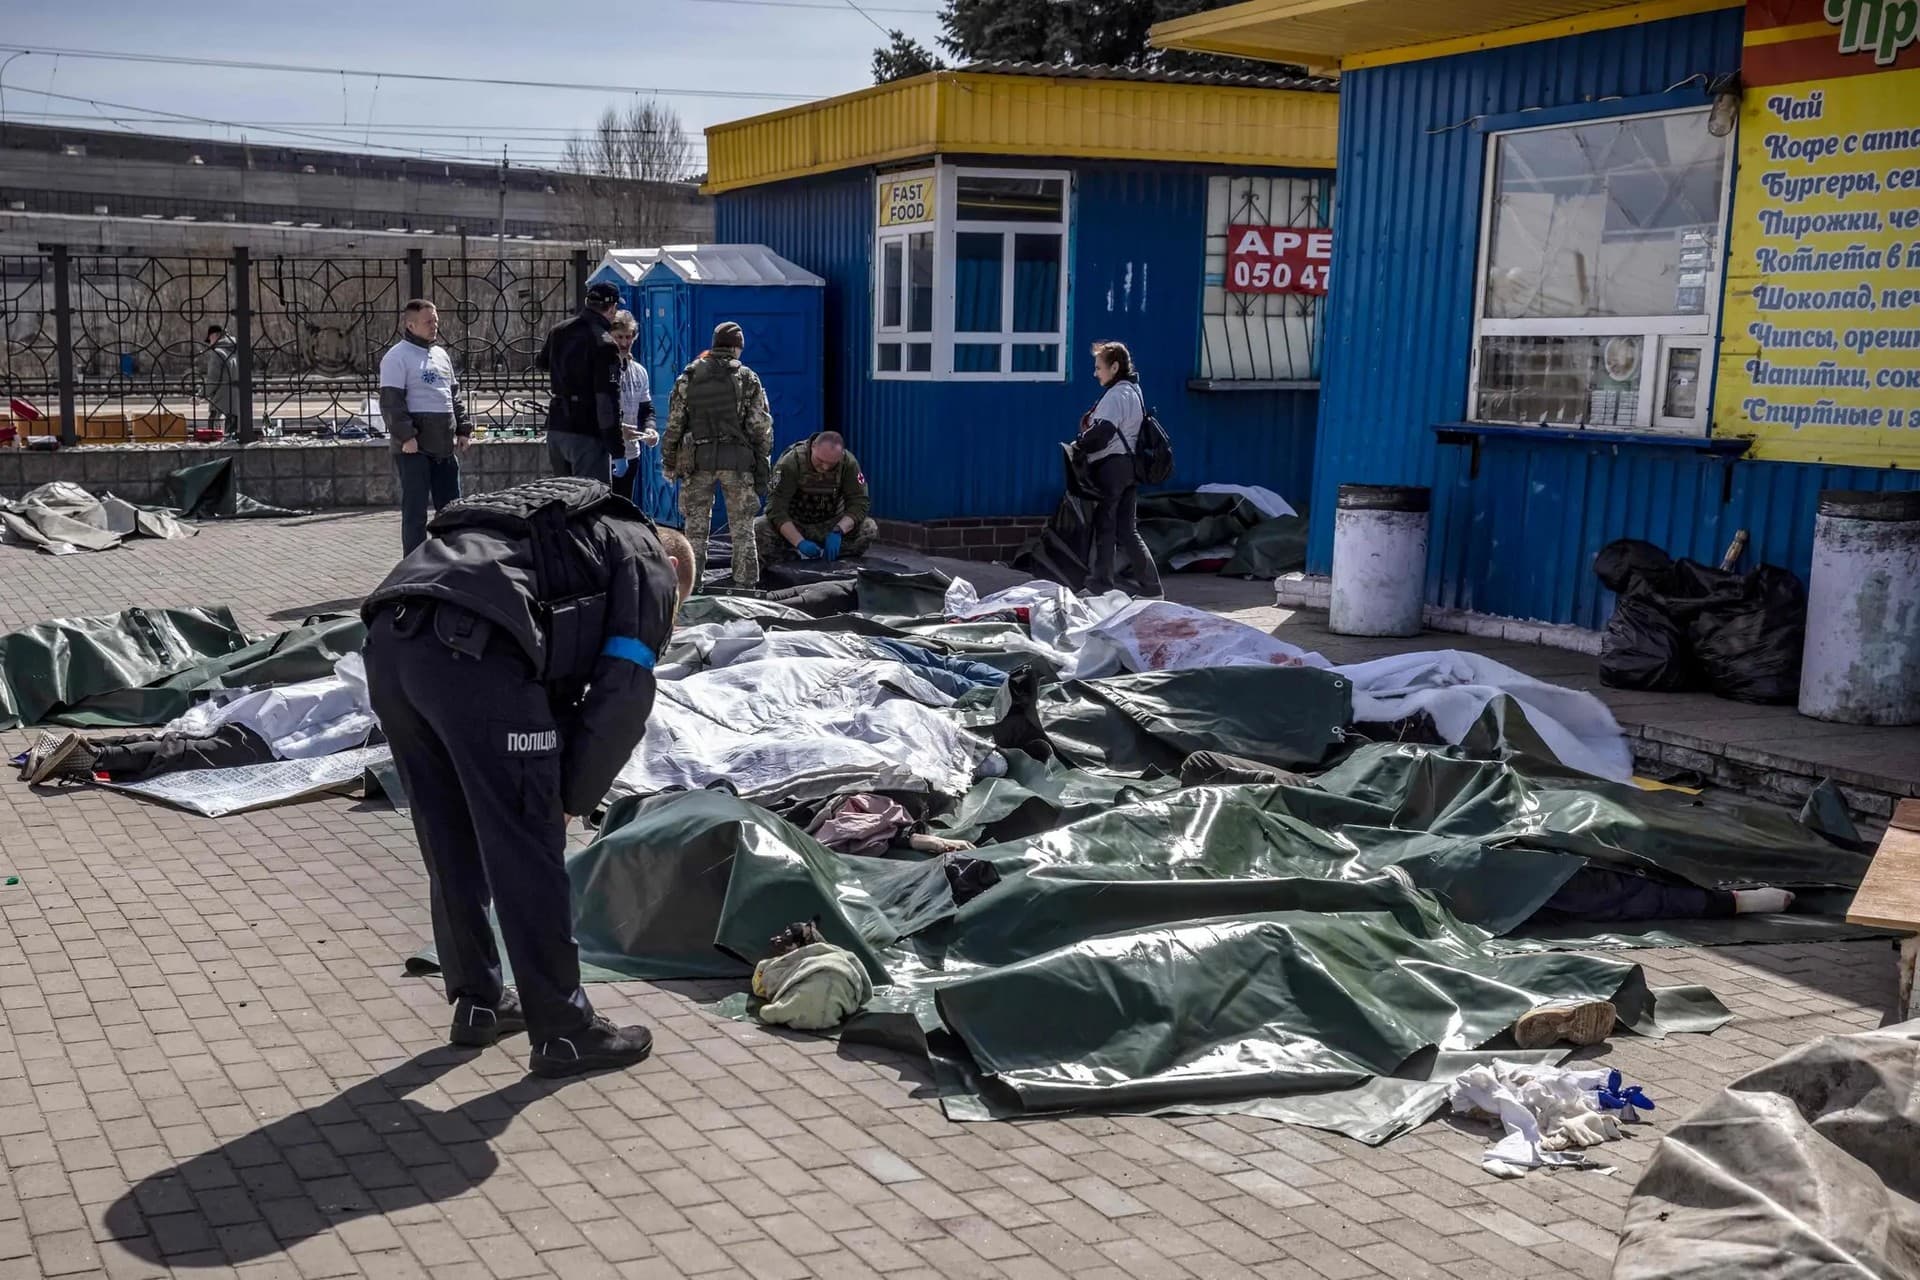 Bodies were covered with tarps after a rocket attack on a train station in Kramatorsk